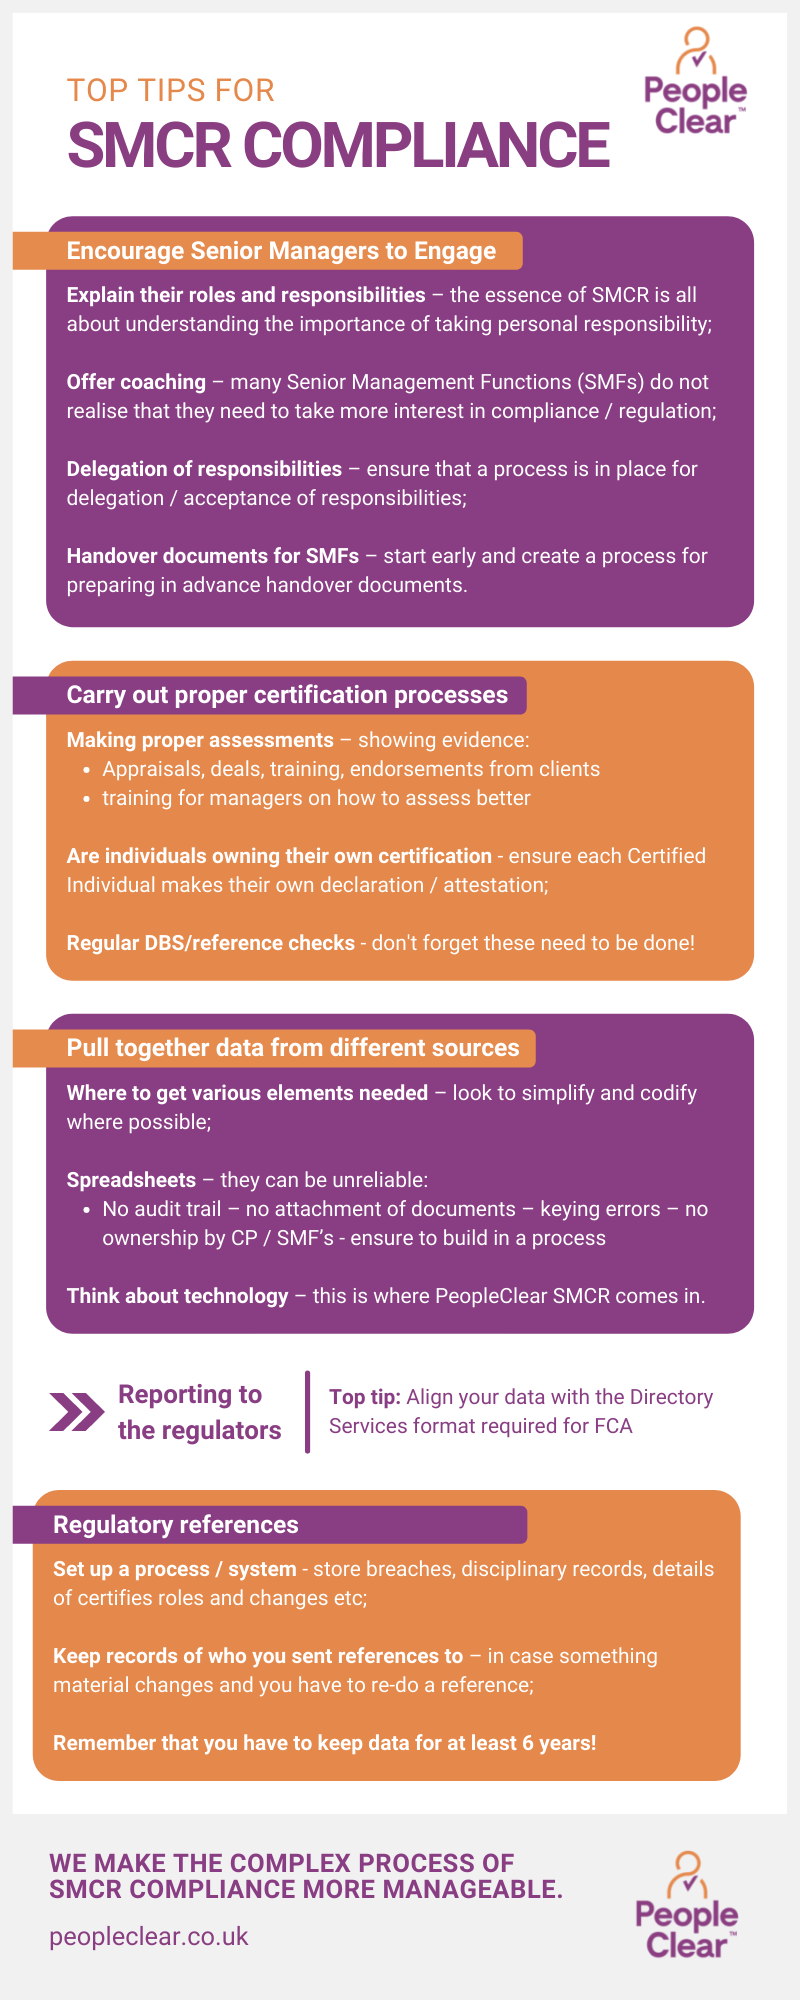 Top tips for SMCR Compliance - infographic from People Clear